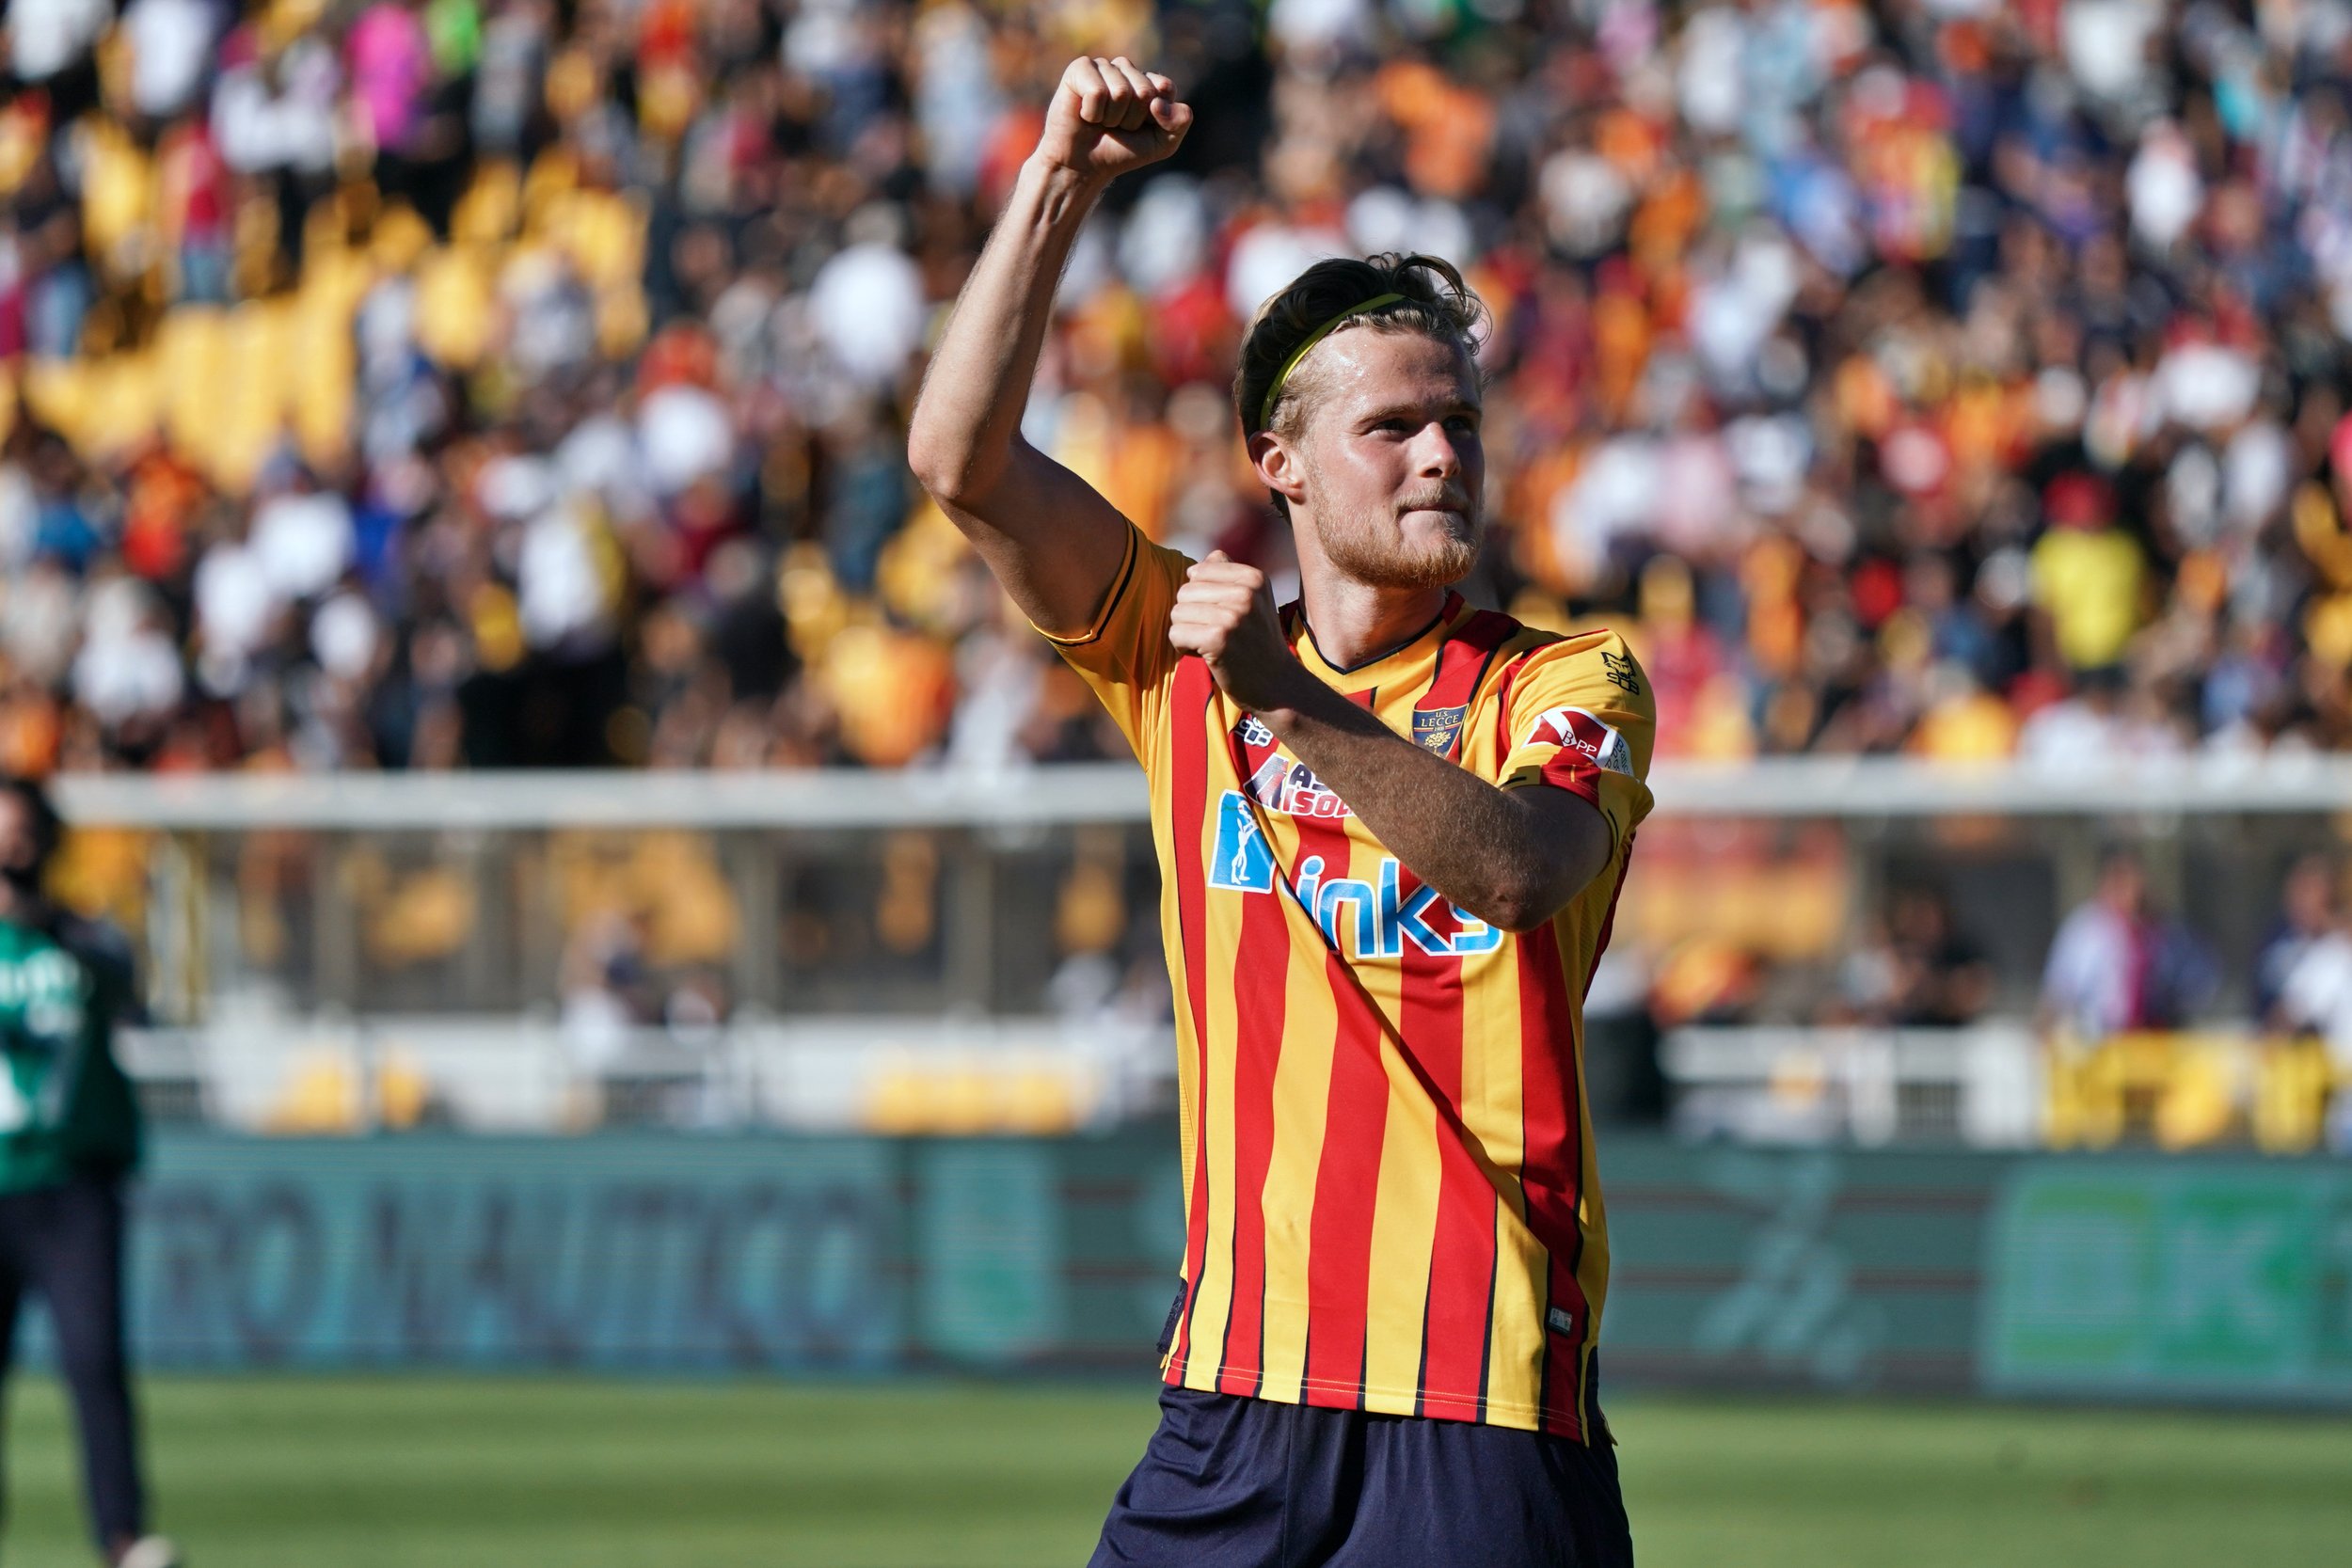 Lecce midfielder Morten Hjulmand leaves Italy to pursue his development in Portugal, as country giants Sporting Lisbon have signed him on a five-year deal.